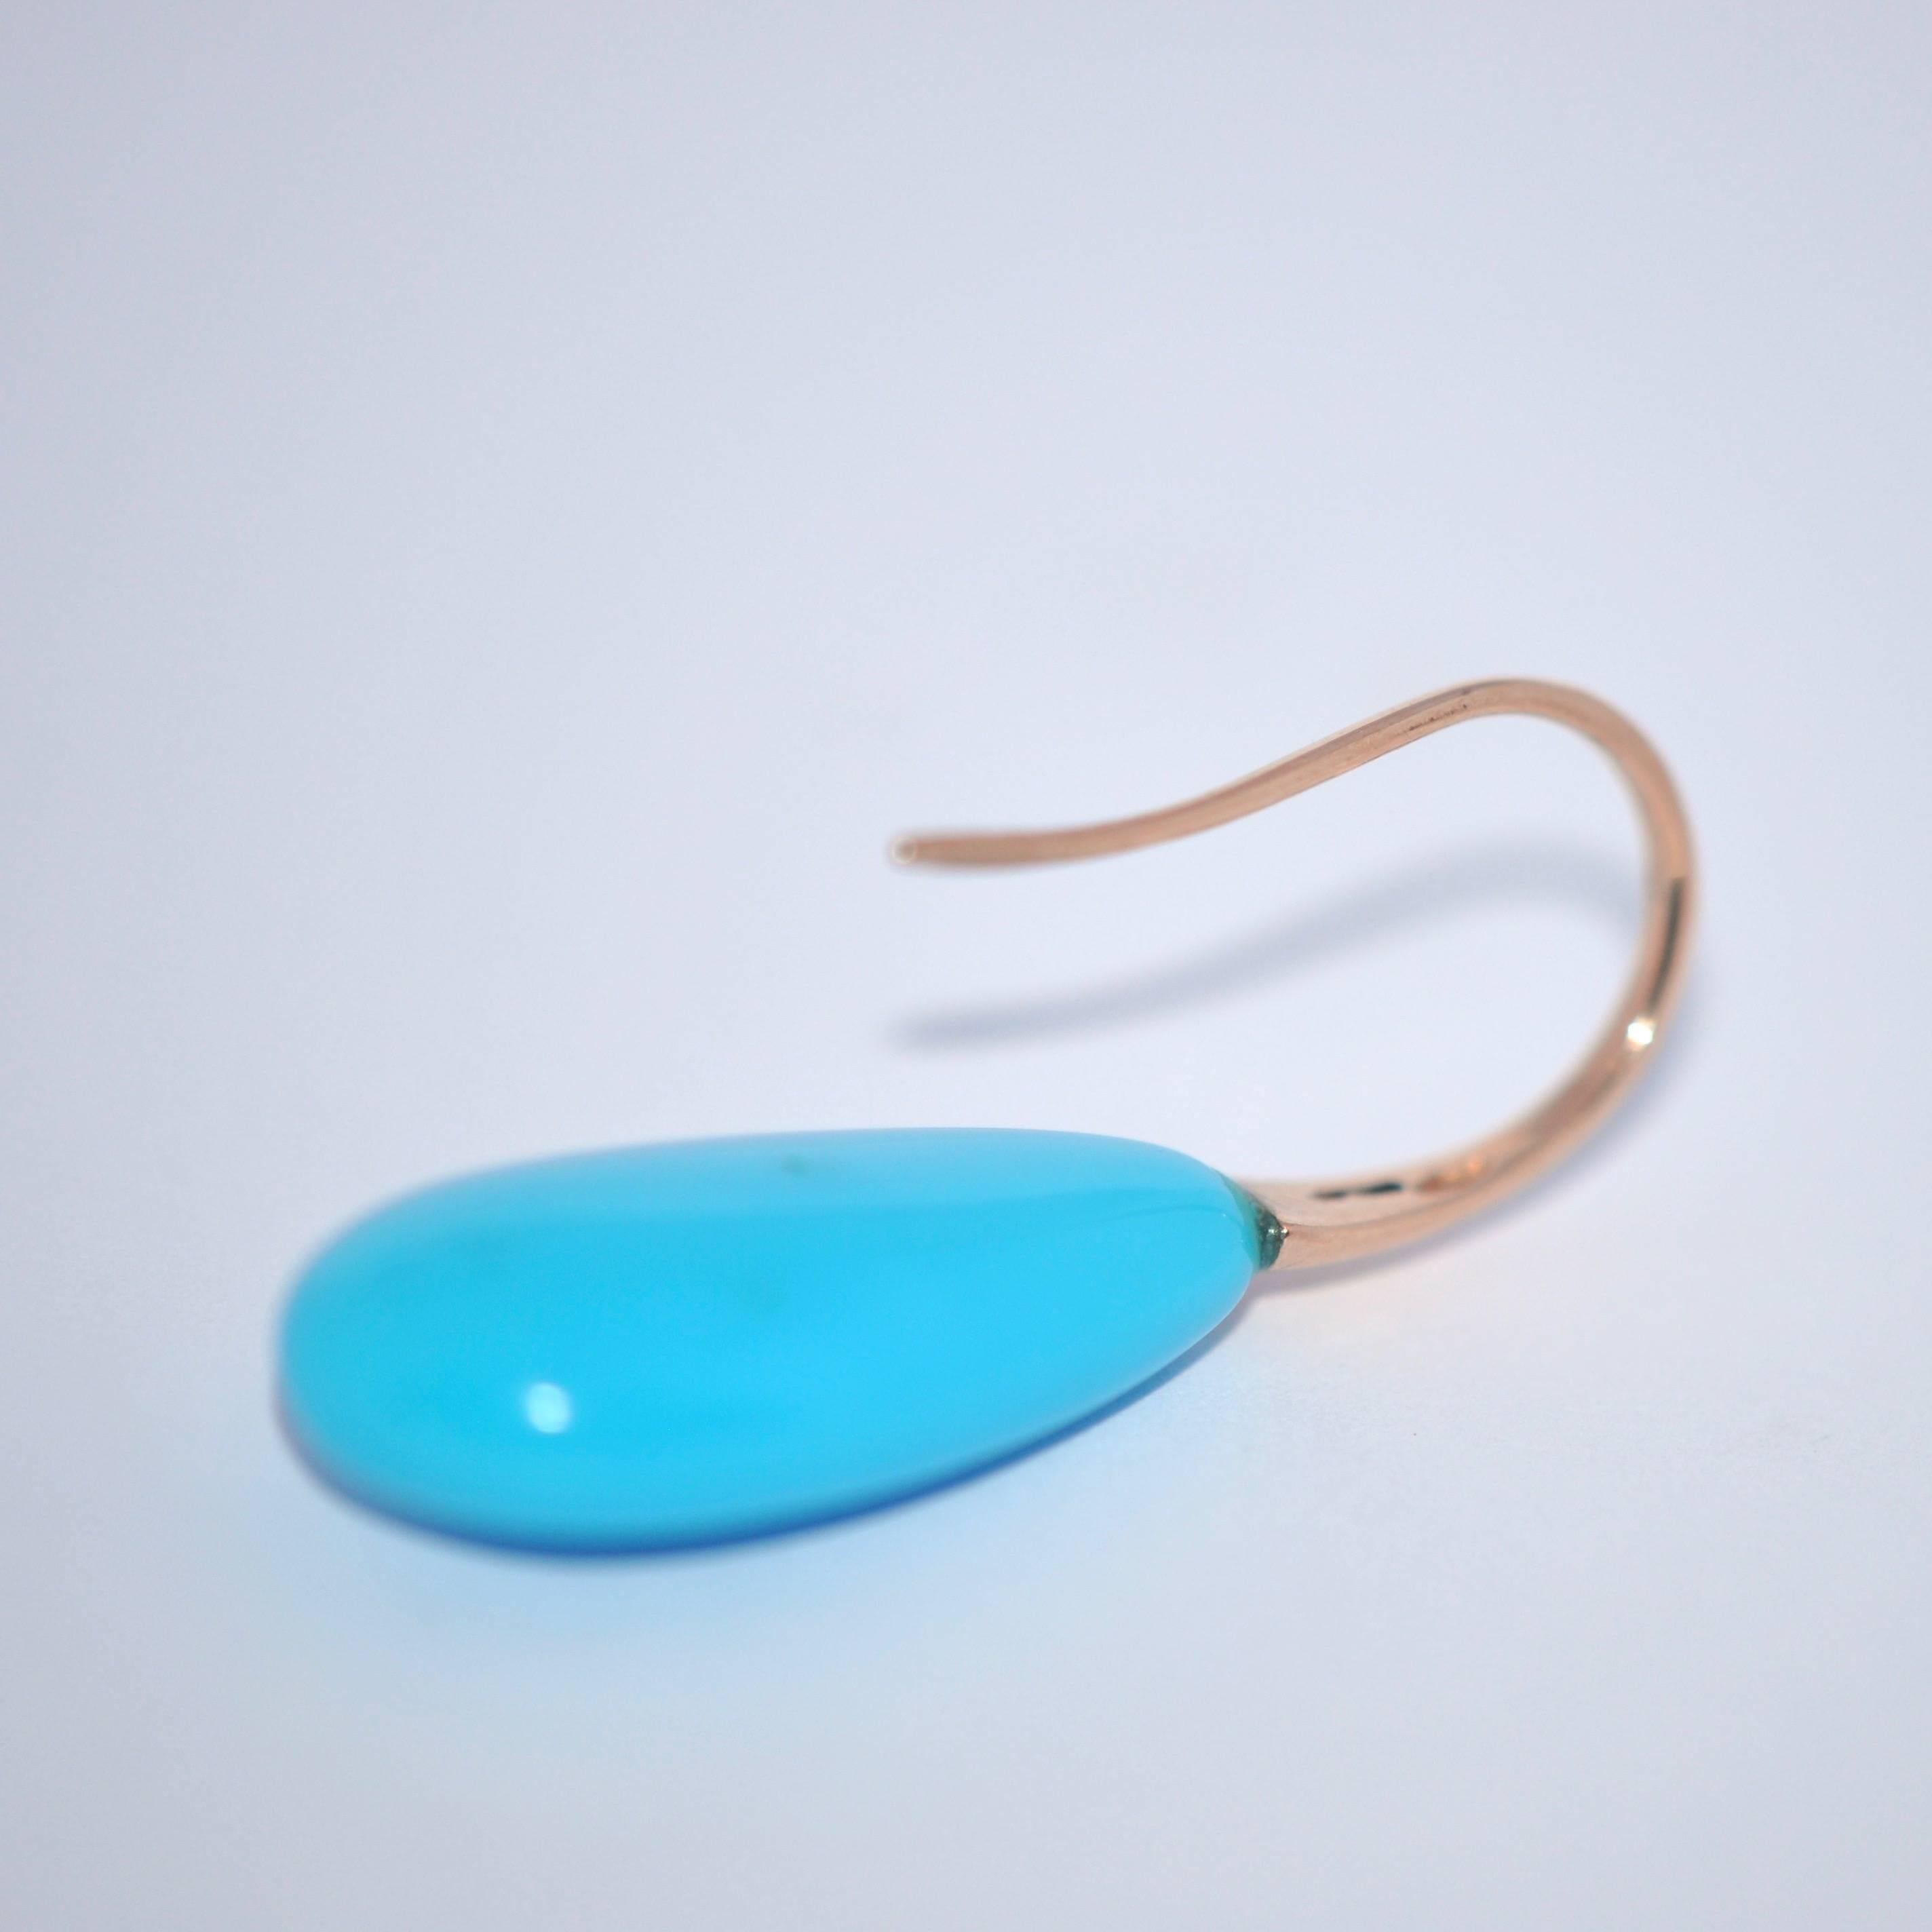 Discover this Natural Turquoises and Rose Gold 18K Drop Earrings.
Natural Turquoises
Rose Gold 18K 
